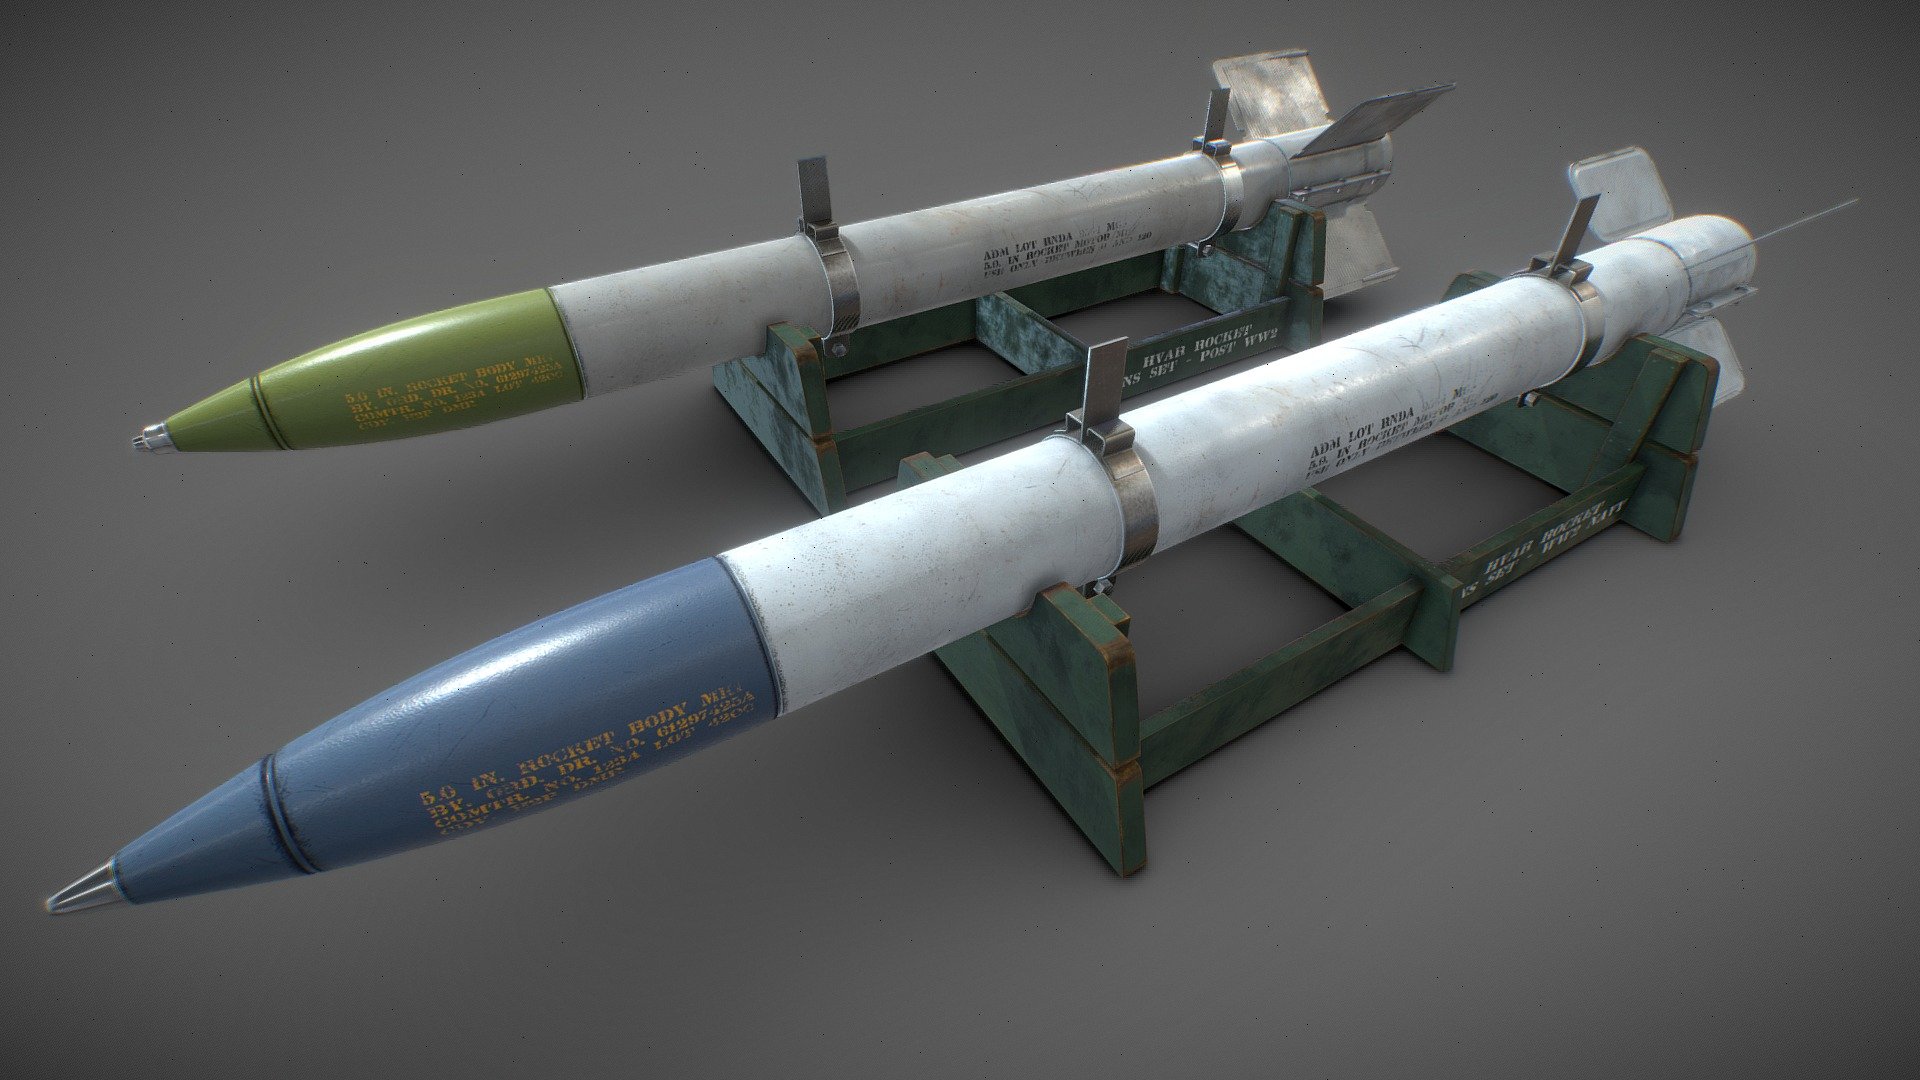 HiPoly models set. Two High Velocity Aircraft Rockets (HVAR) with different fins variations (ww2 navy / post ww2) laying on wooden stands.
Textures are in mostly 4k ( only clamps are 2k) and contain 2 color variants 3d model